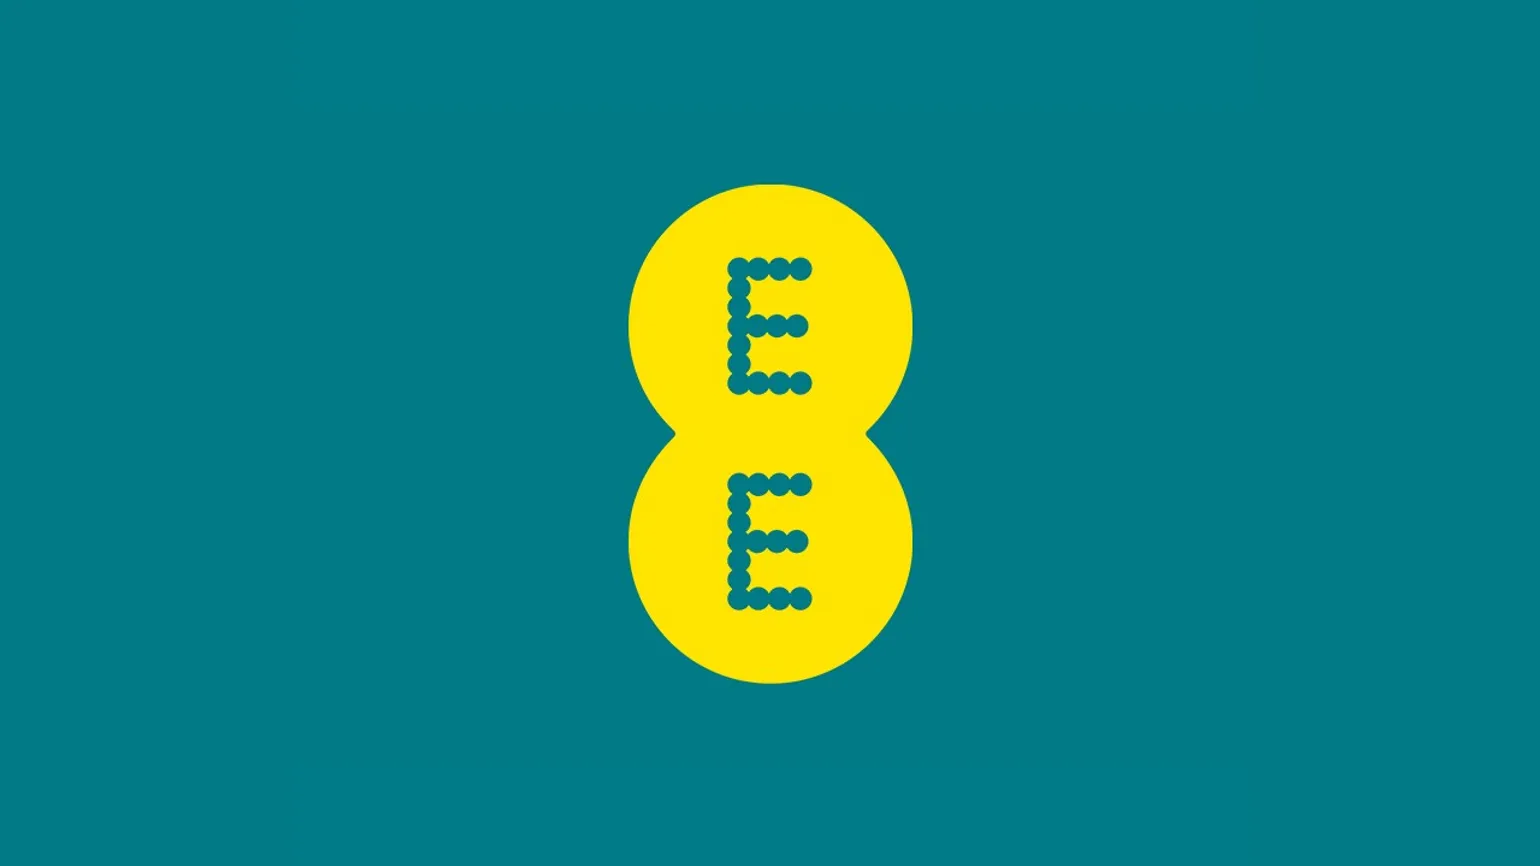 EE review - great coverage and download speeds, but at a cost